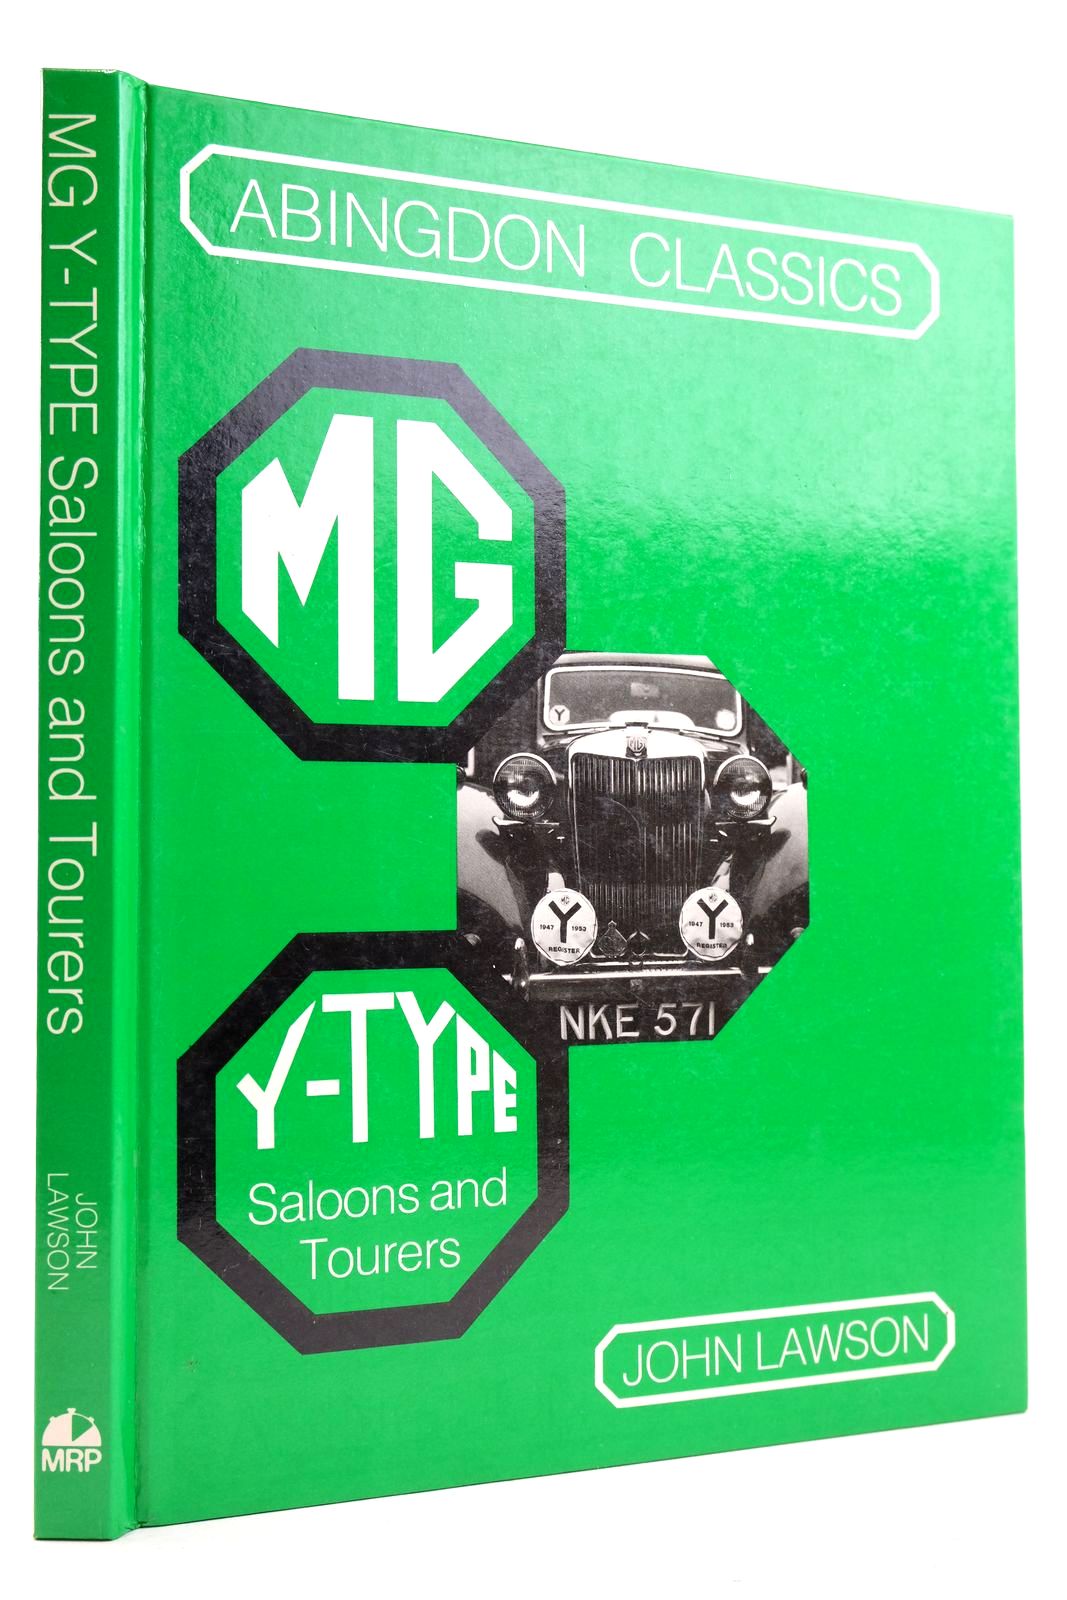 Photo of MG Y-TYPE SALOONS AND TOURERS written by Lawson, John published by Motor Racing Publications Ltd. (STOCK CODE: 2133095)  for sale by Stella & Rose's Books